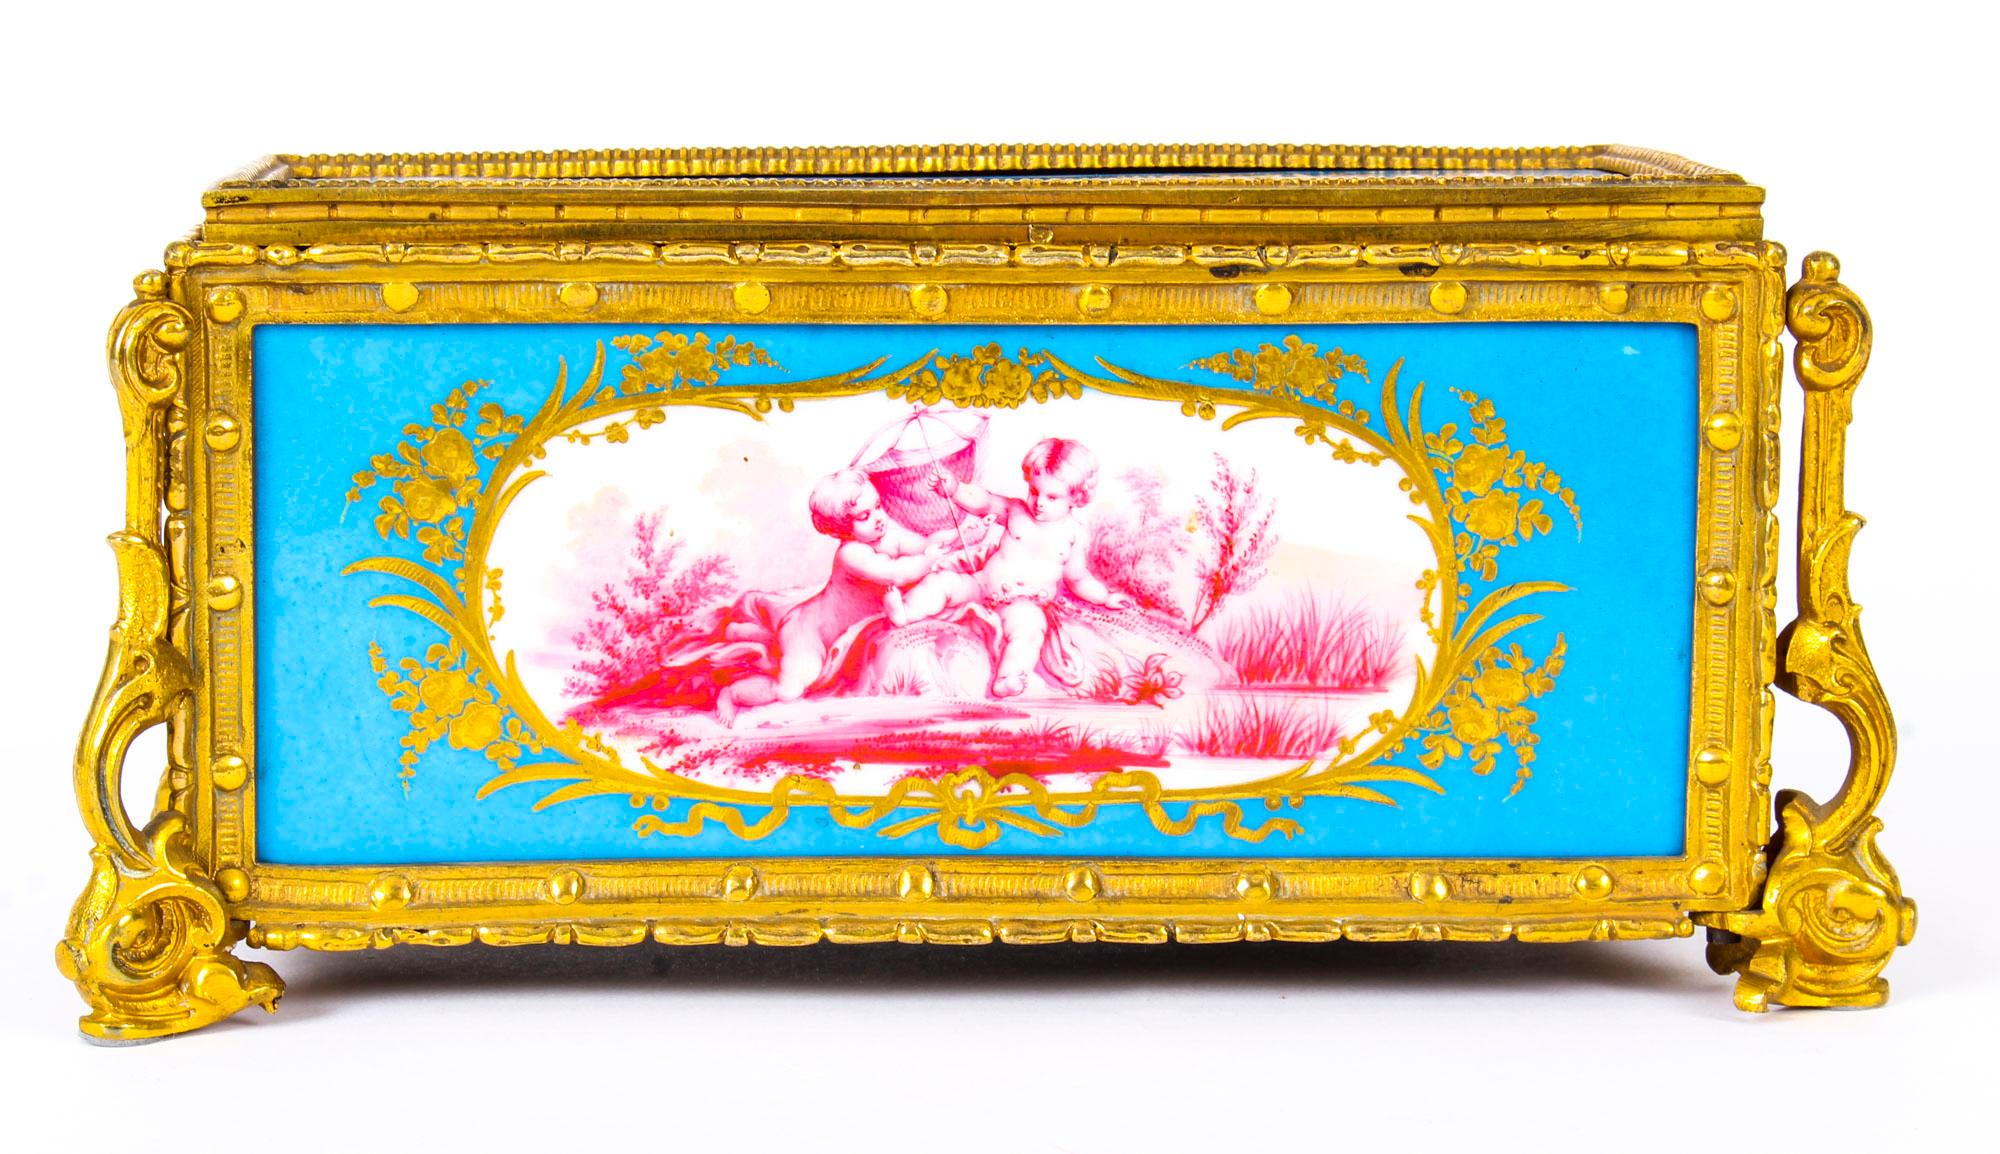 This is a fabulous antique French Ormolu and Sevres Porcelain jewelry casket, circa 1870 in date.

This magnificent casket is rectangular in shape, with the top as well as each side exceptionally well decorated with superb Sevres Porcelain panels